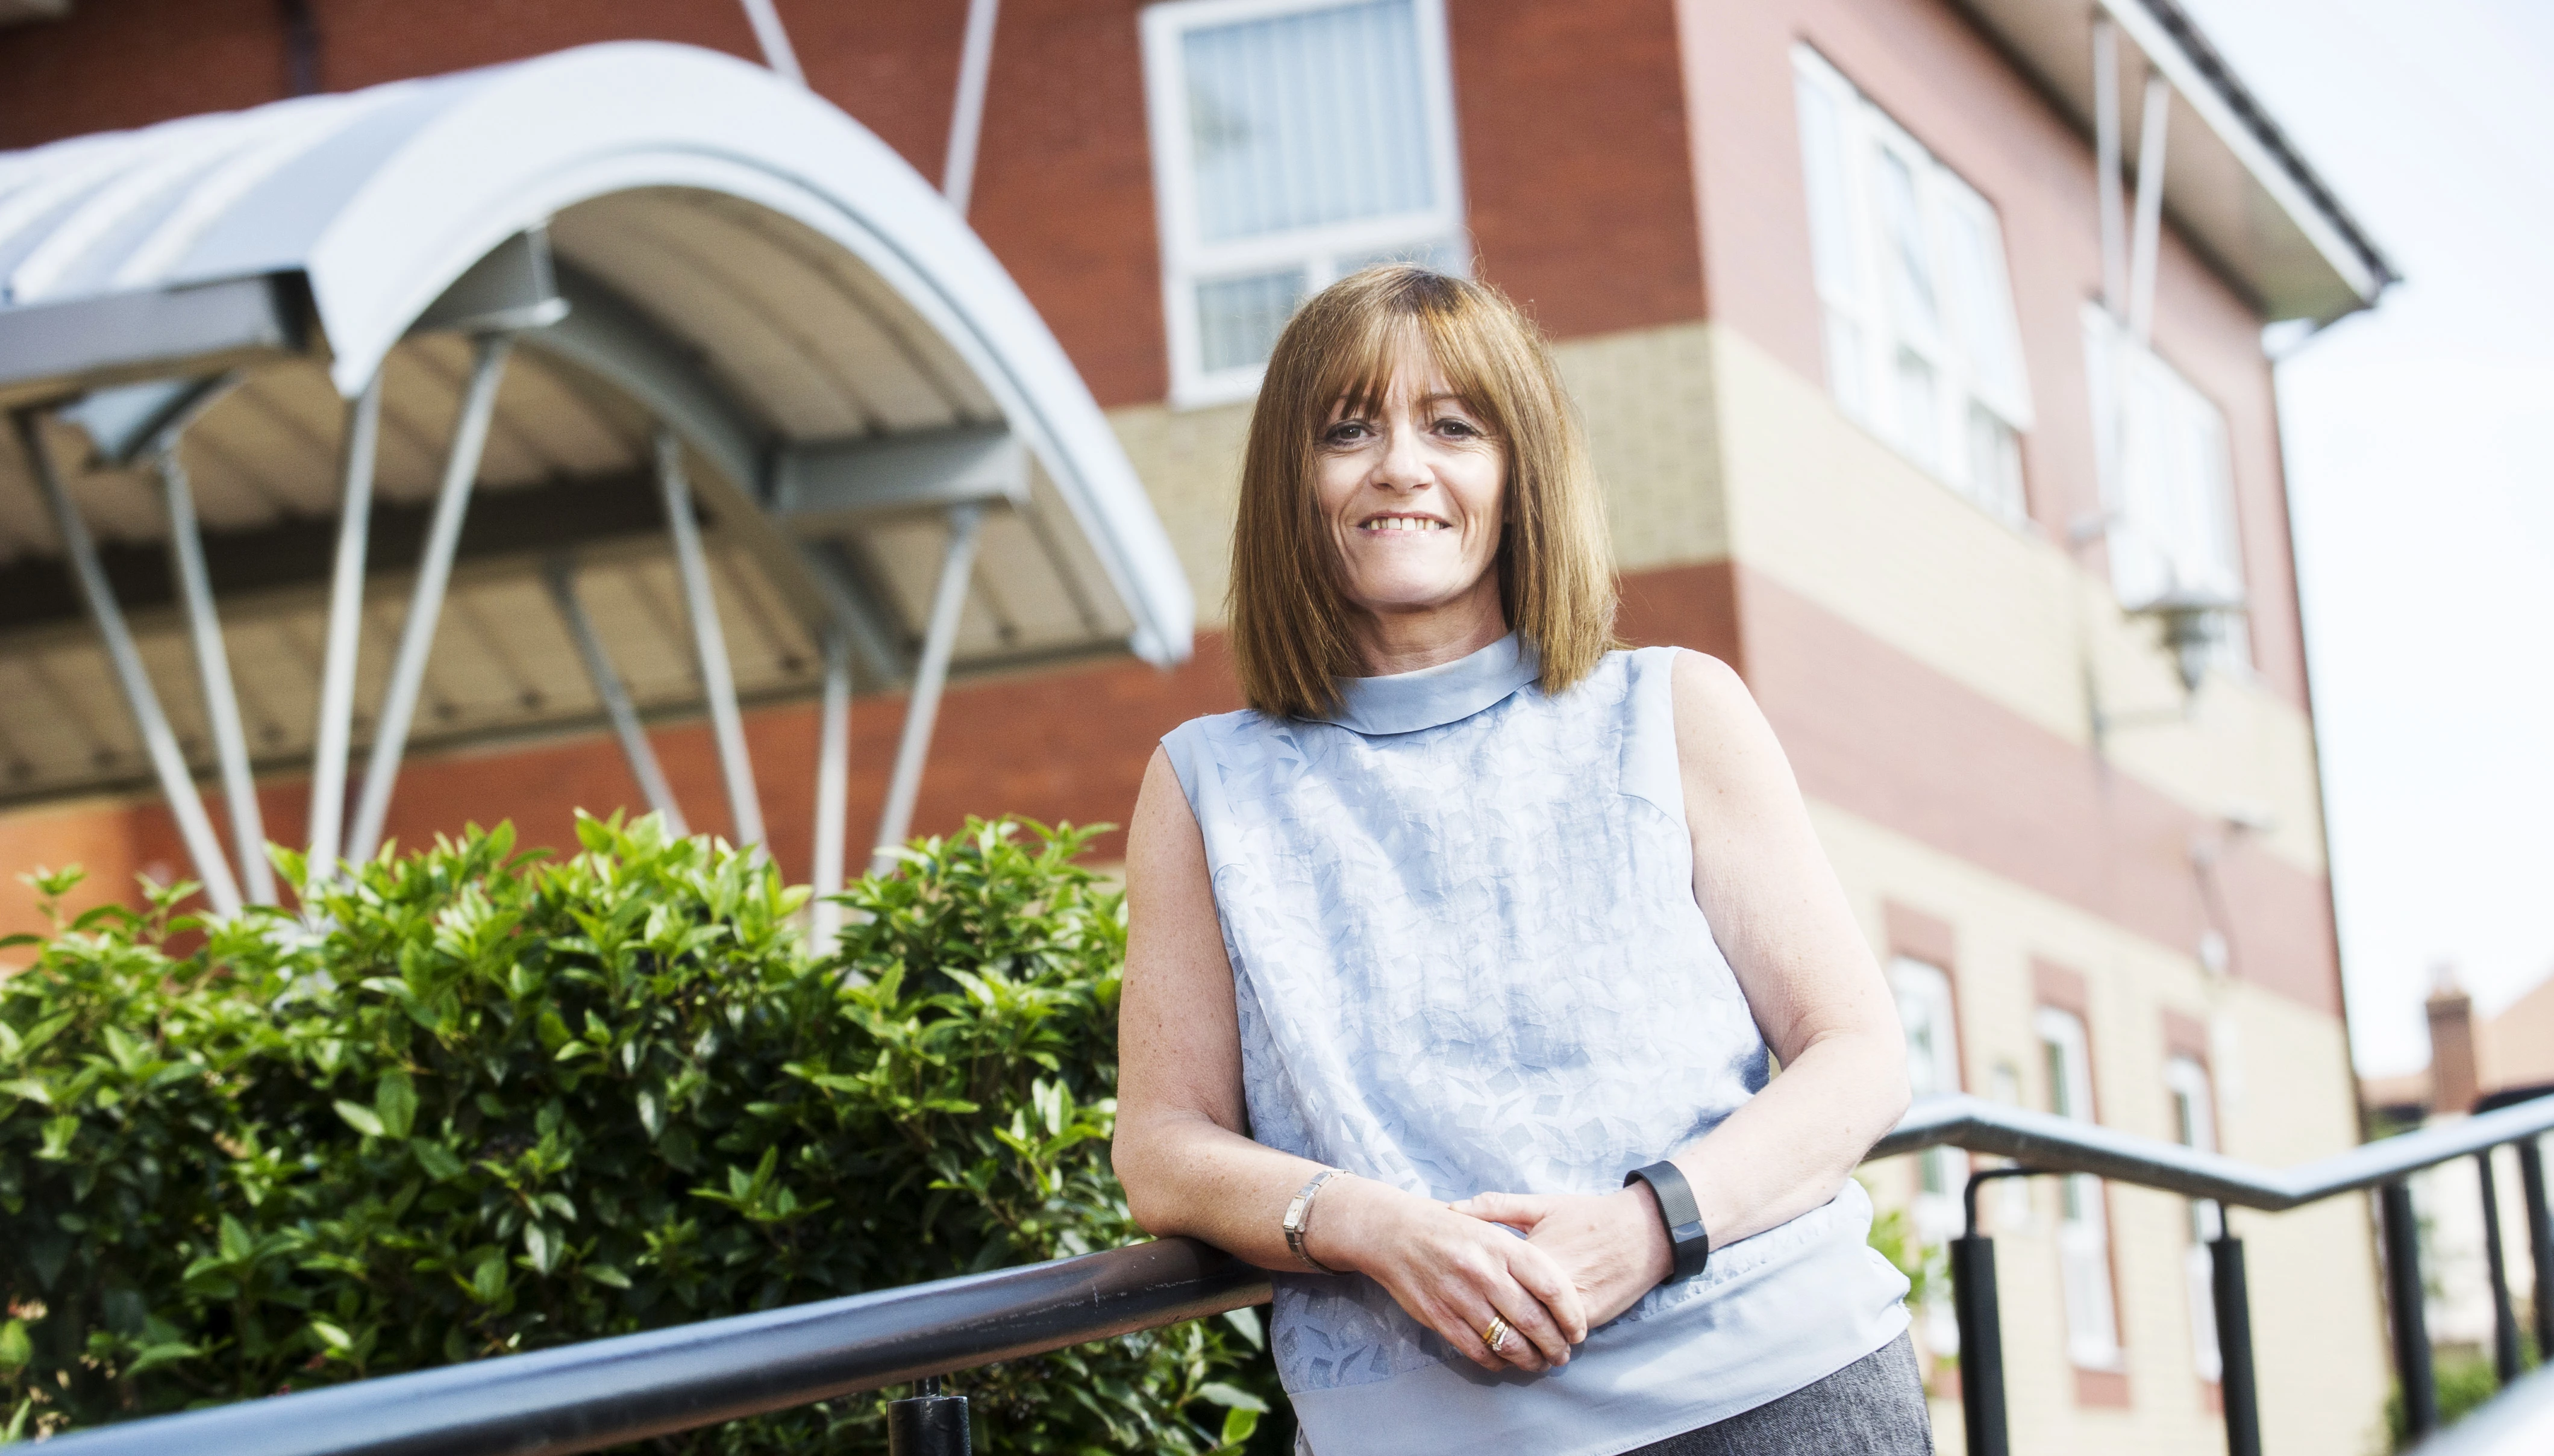 Neighbourhoods director Jan Goode, shortlisted in the Business Person of the Year category of the midlands Business Awards 